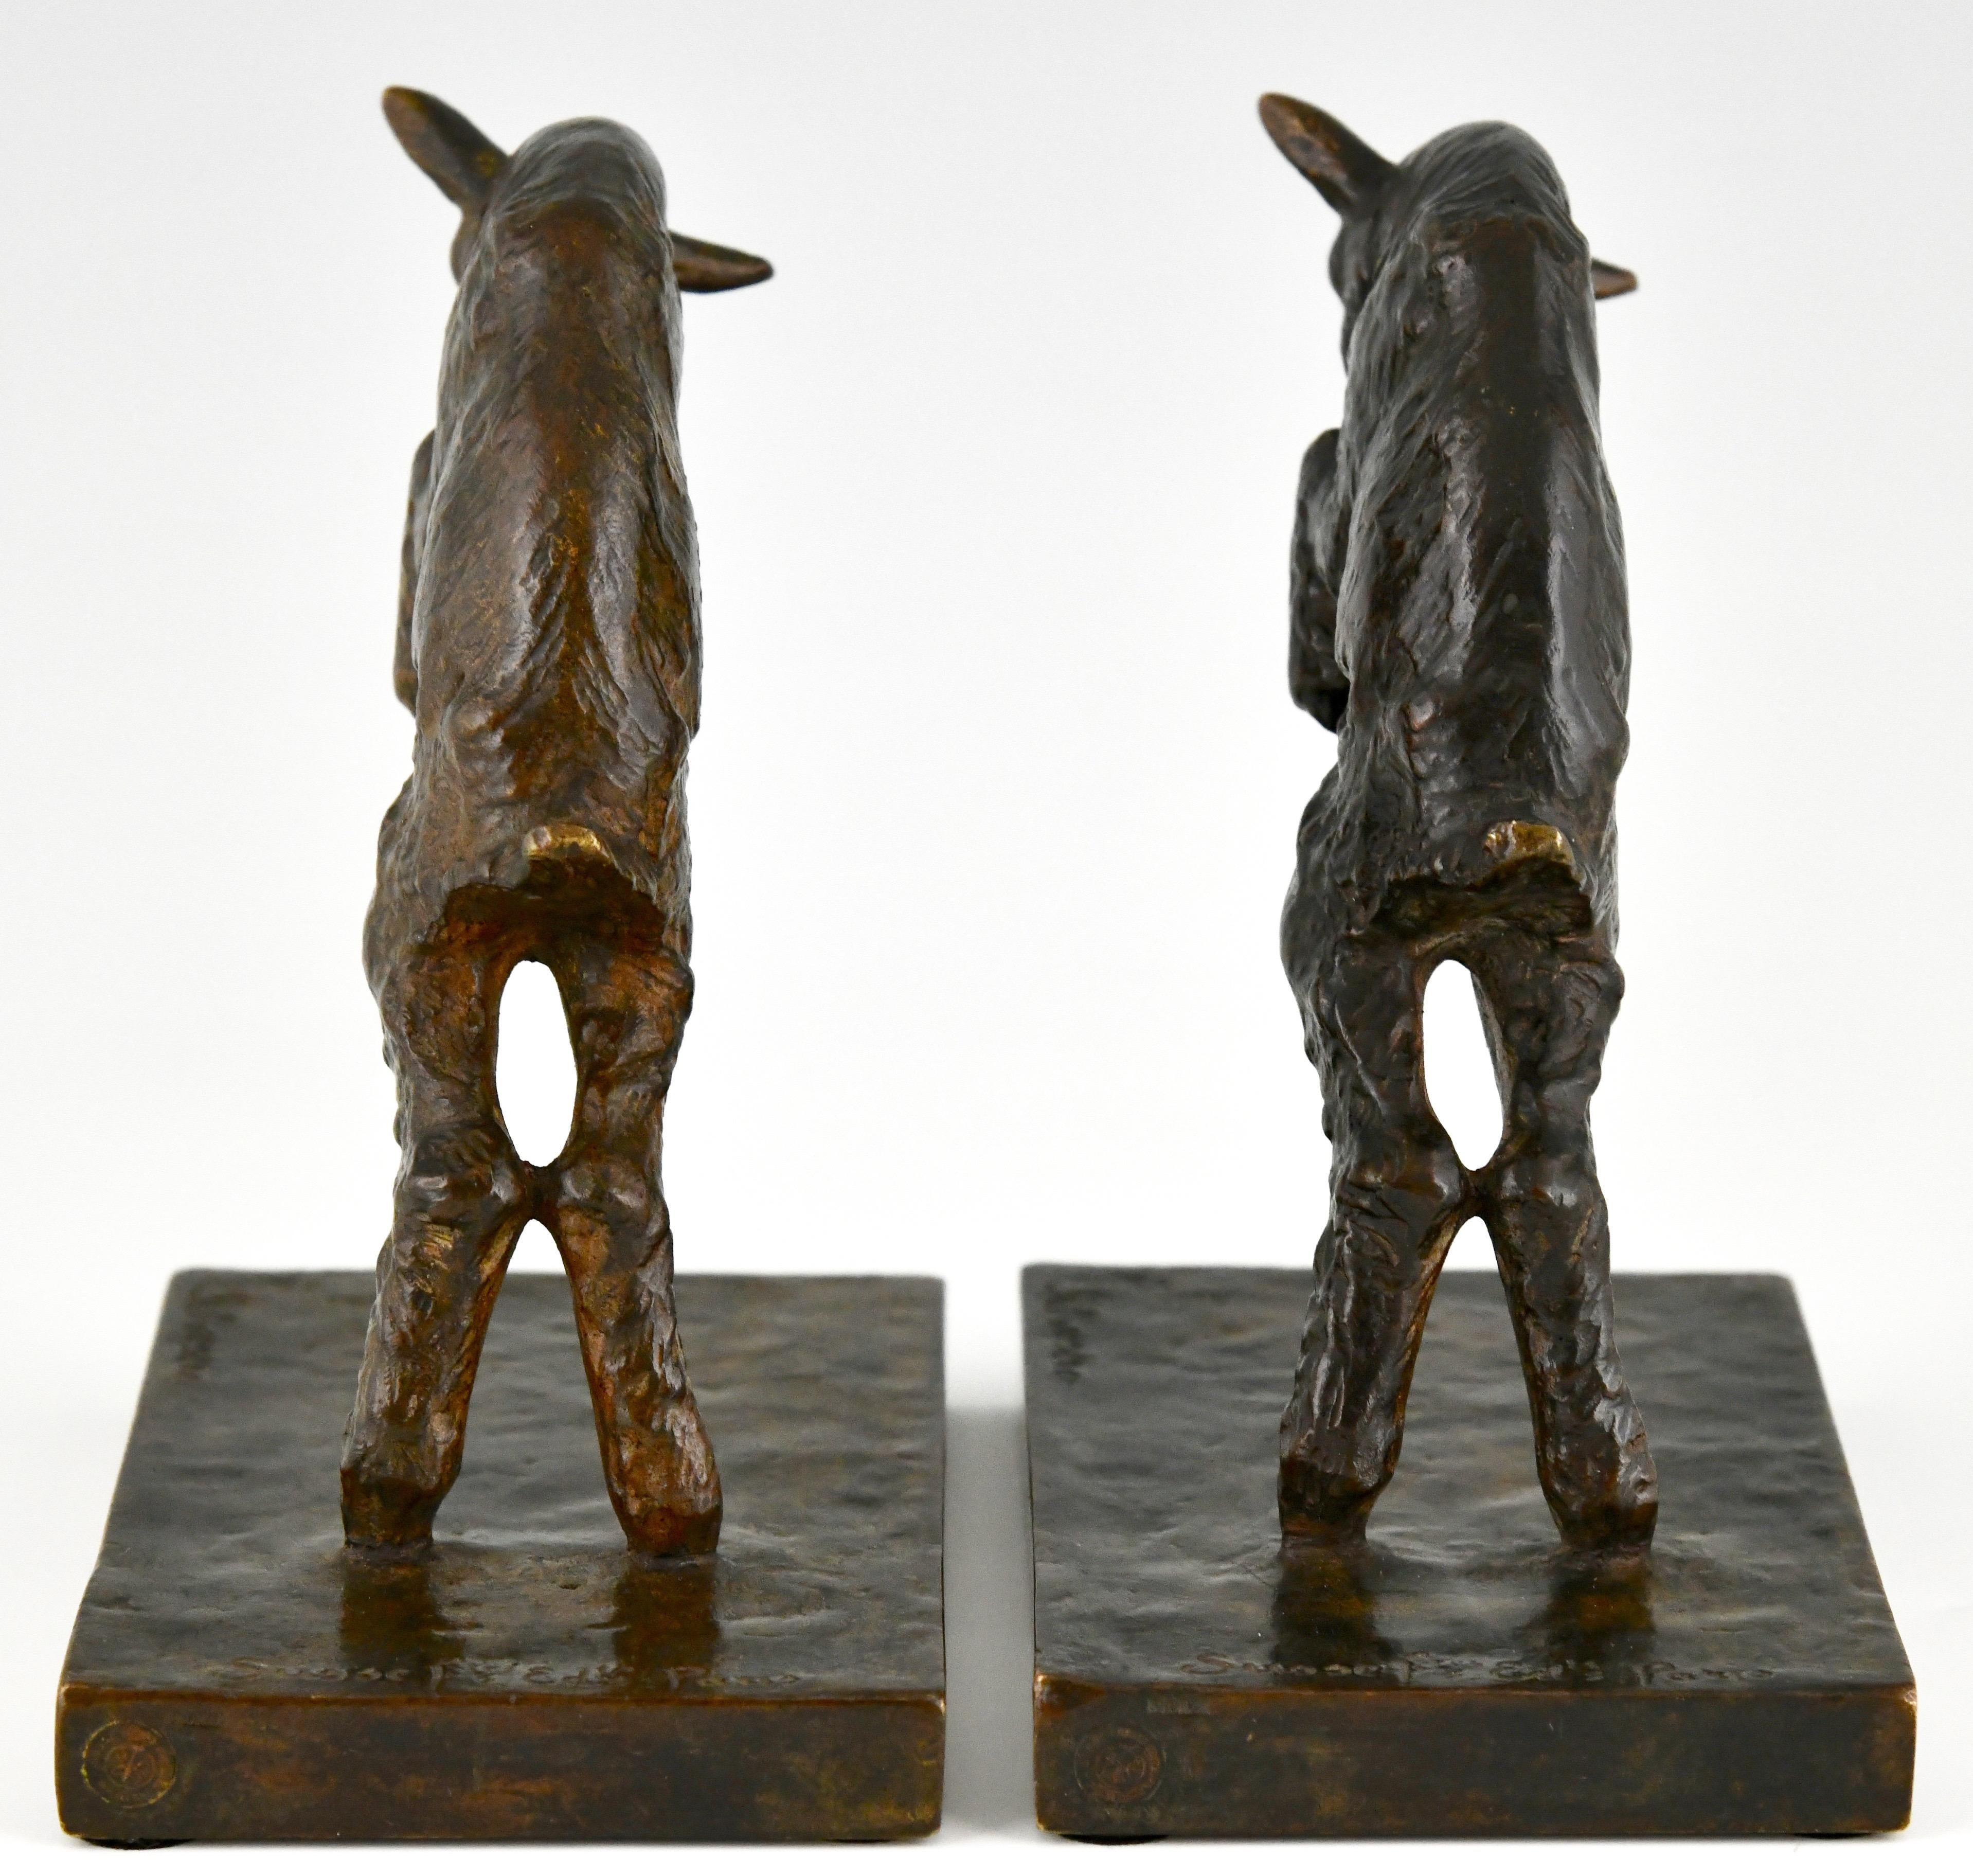 French Art Deco Bronze Lamb Bookends by Paul Silvestre, Susse Frères Foundry 1930